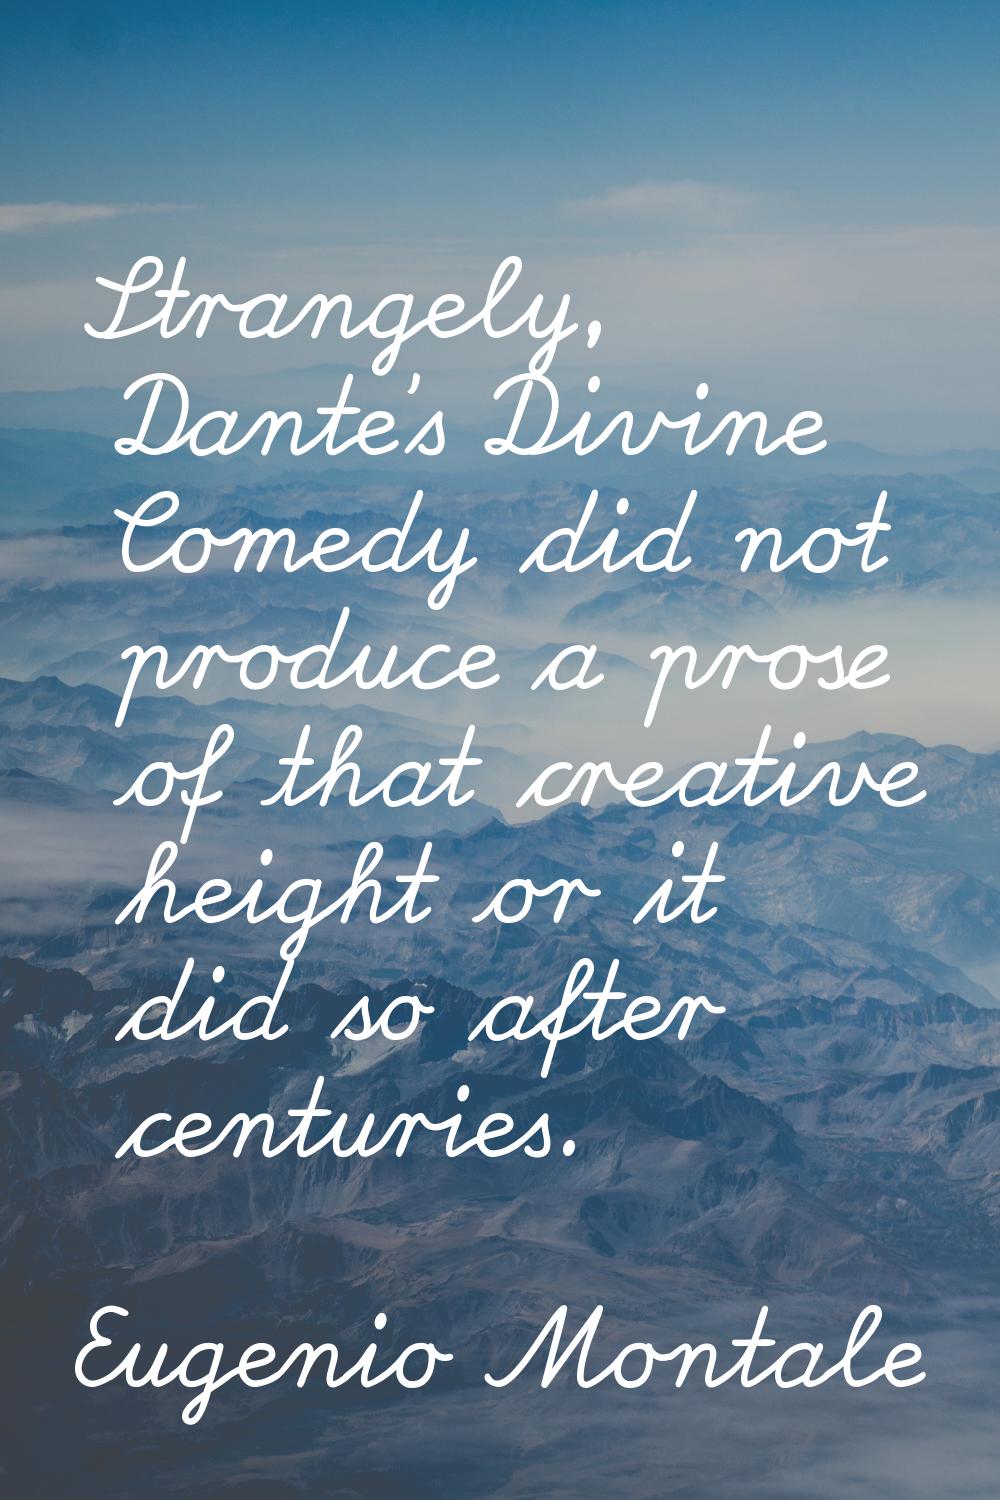 Strangely, Dante's Divine Comedy did not produce a prose of that creative height or it did so after